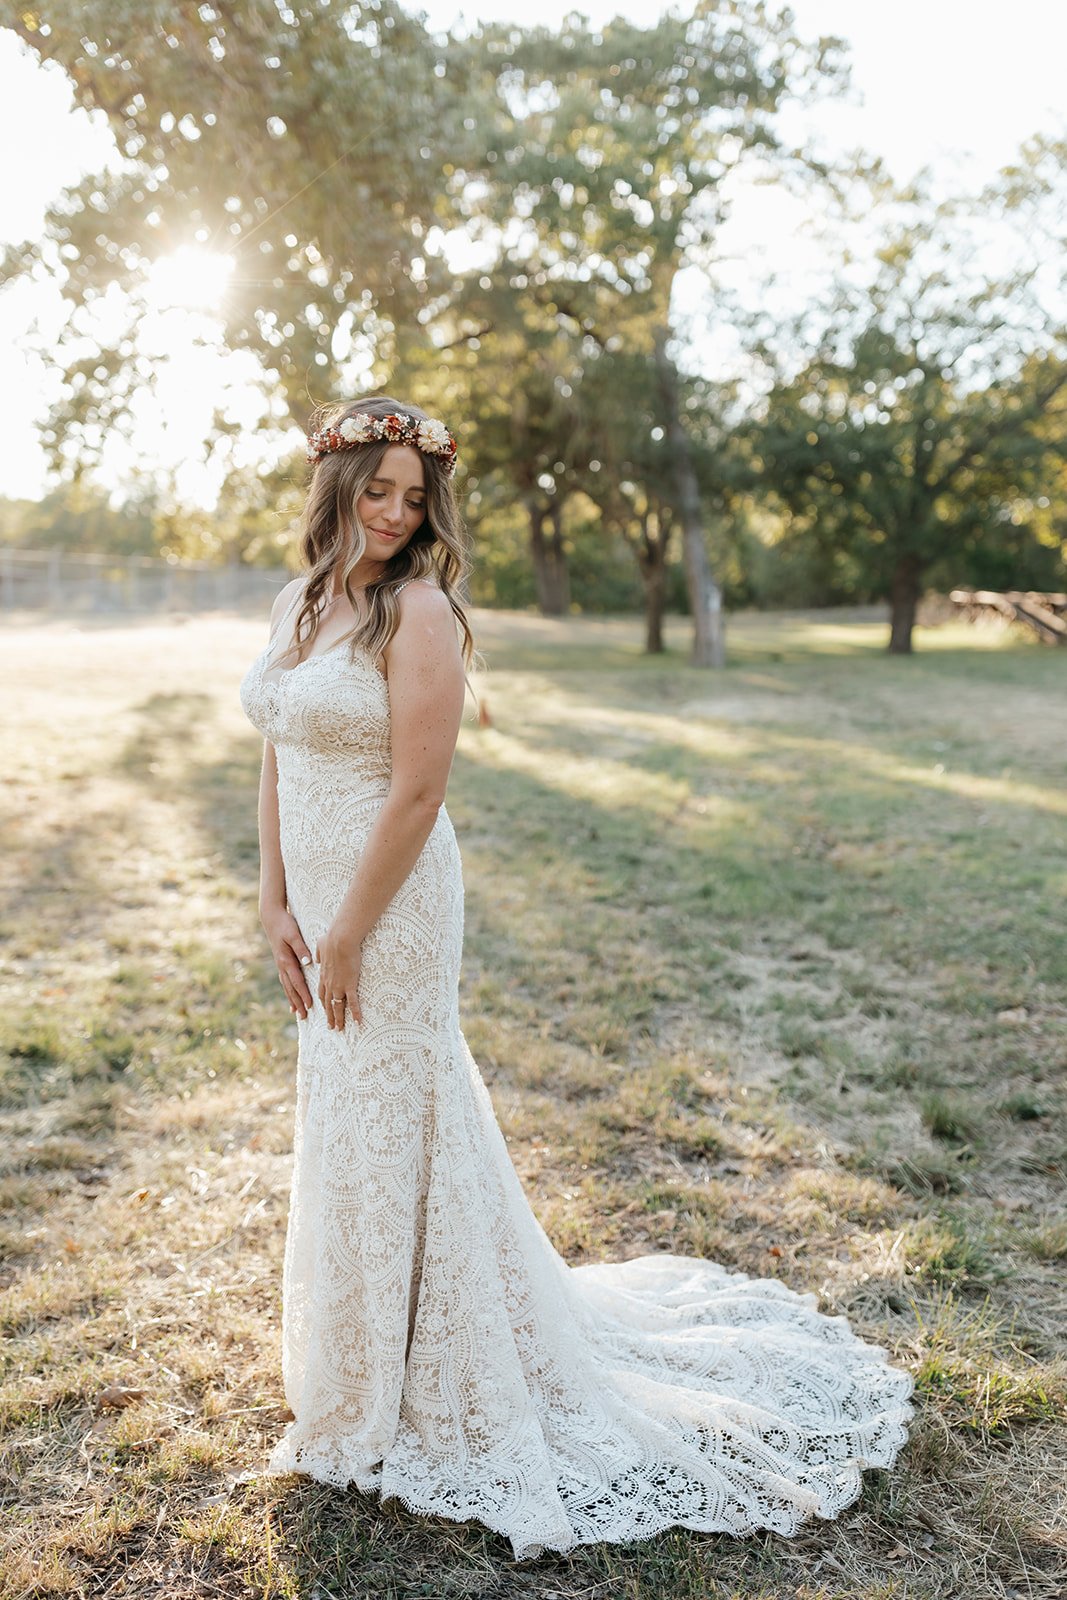 Leah got some stunning bridal portraits during golden hour at Baron's Creek Camp